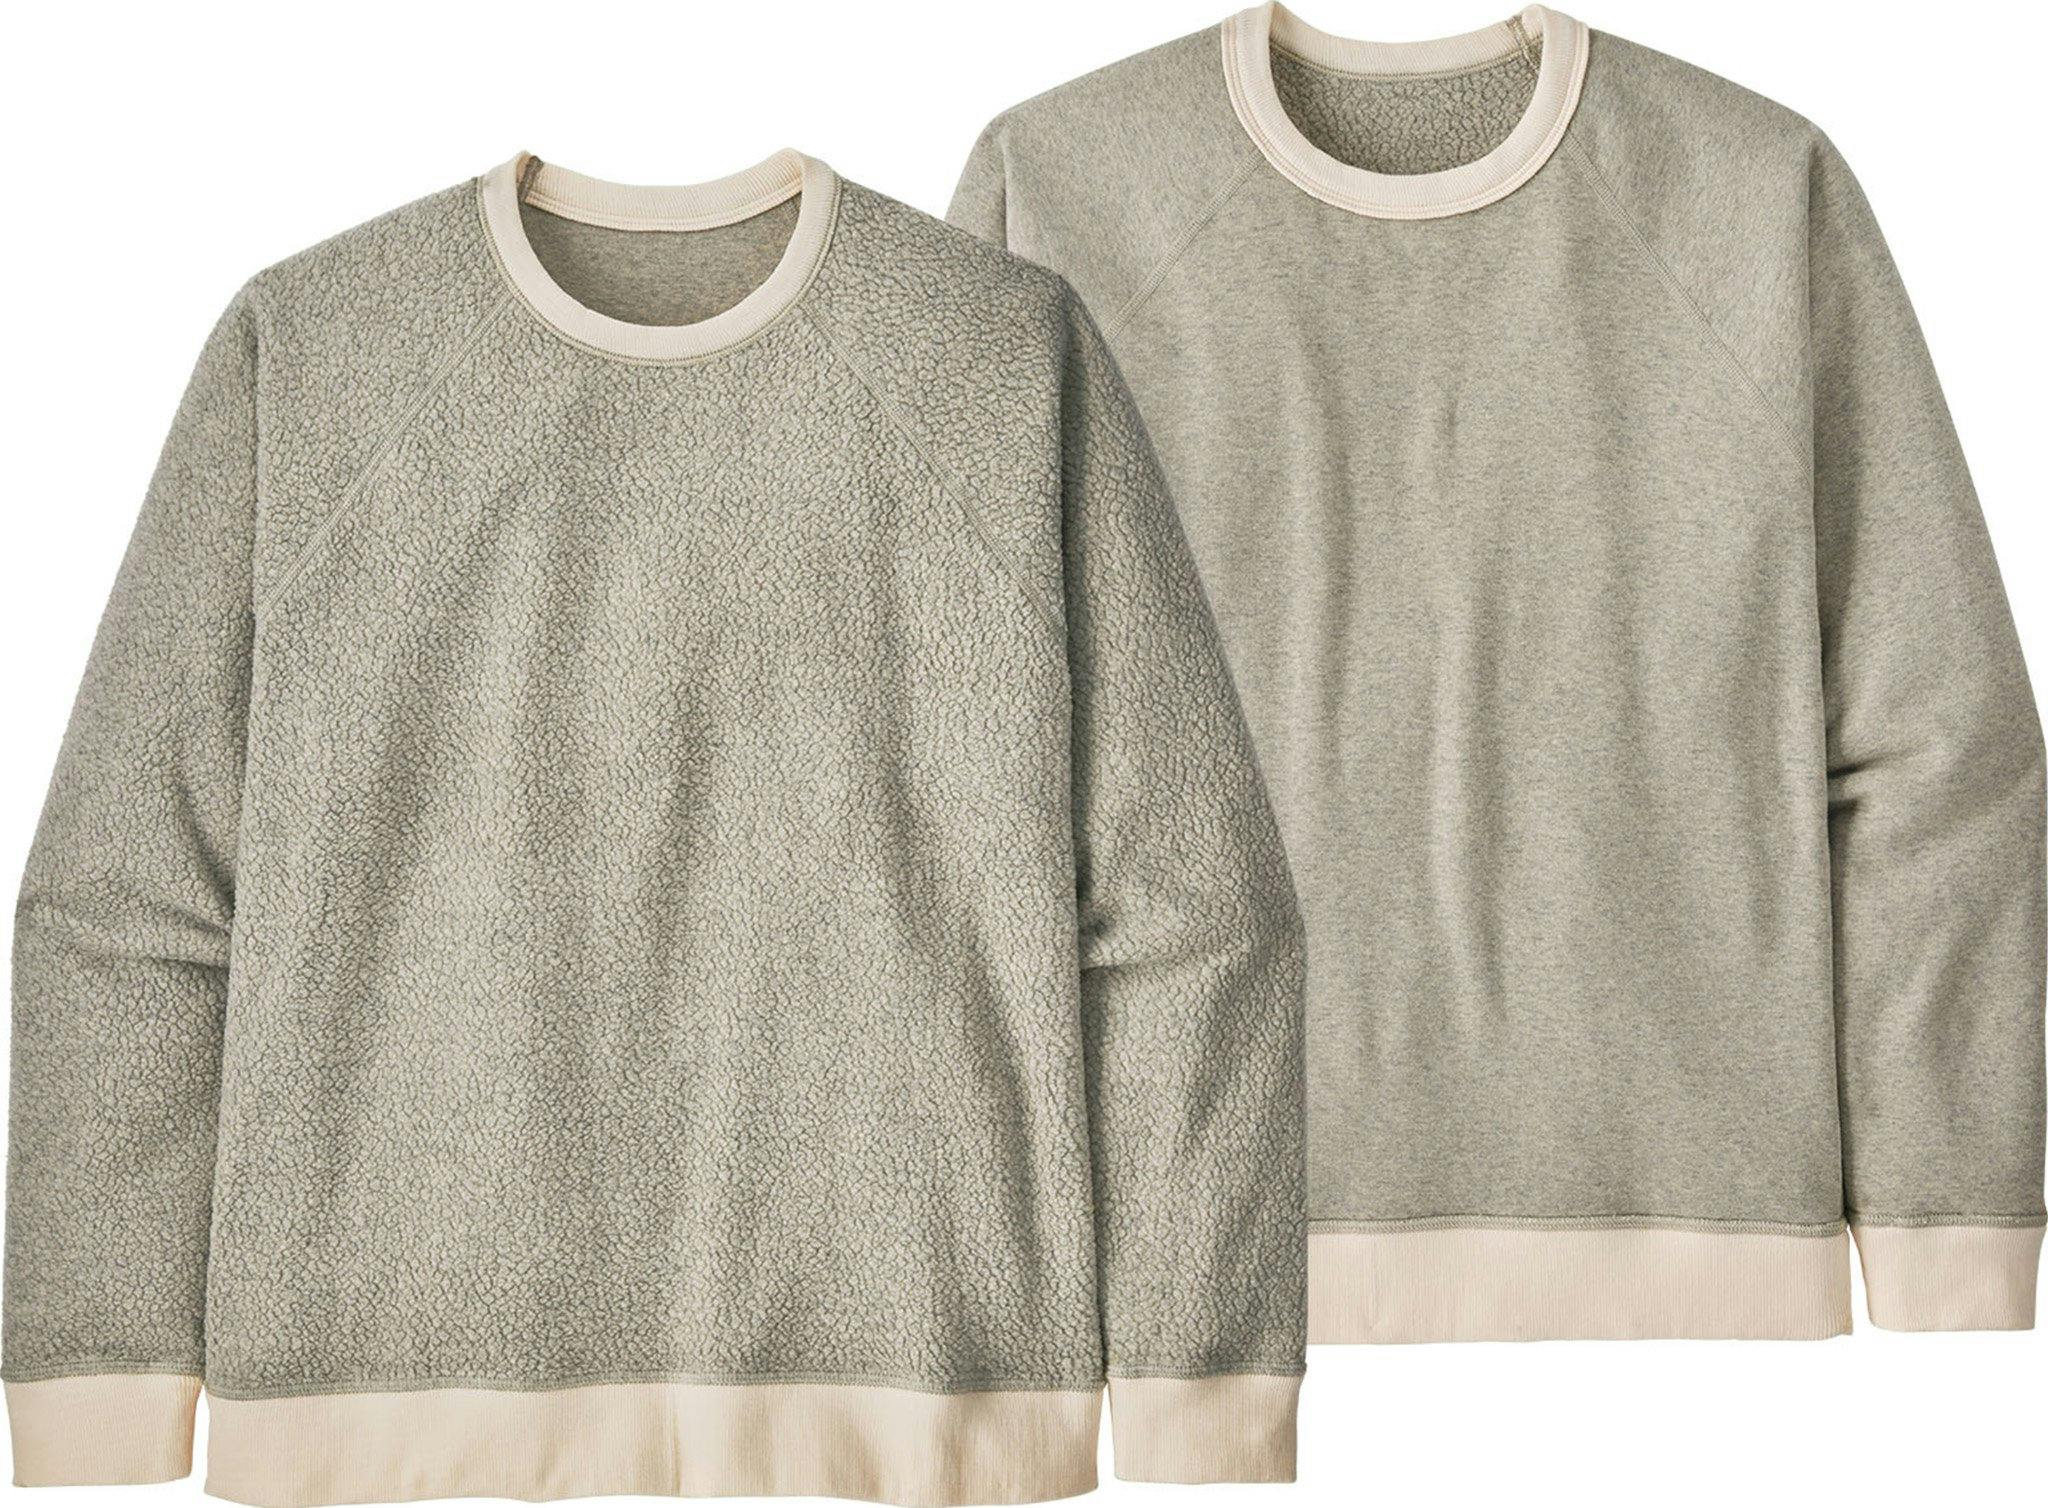 Product image for Reversible Shearling Crew Neck Pullover - Men's